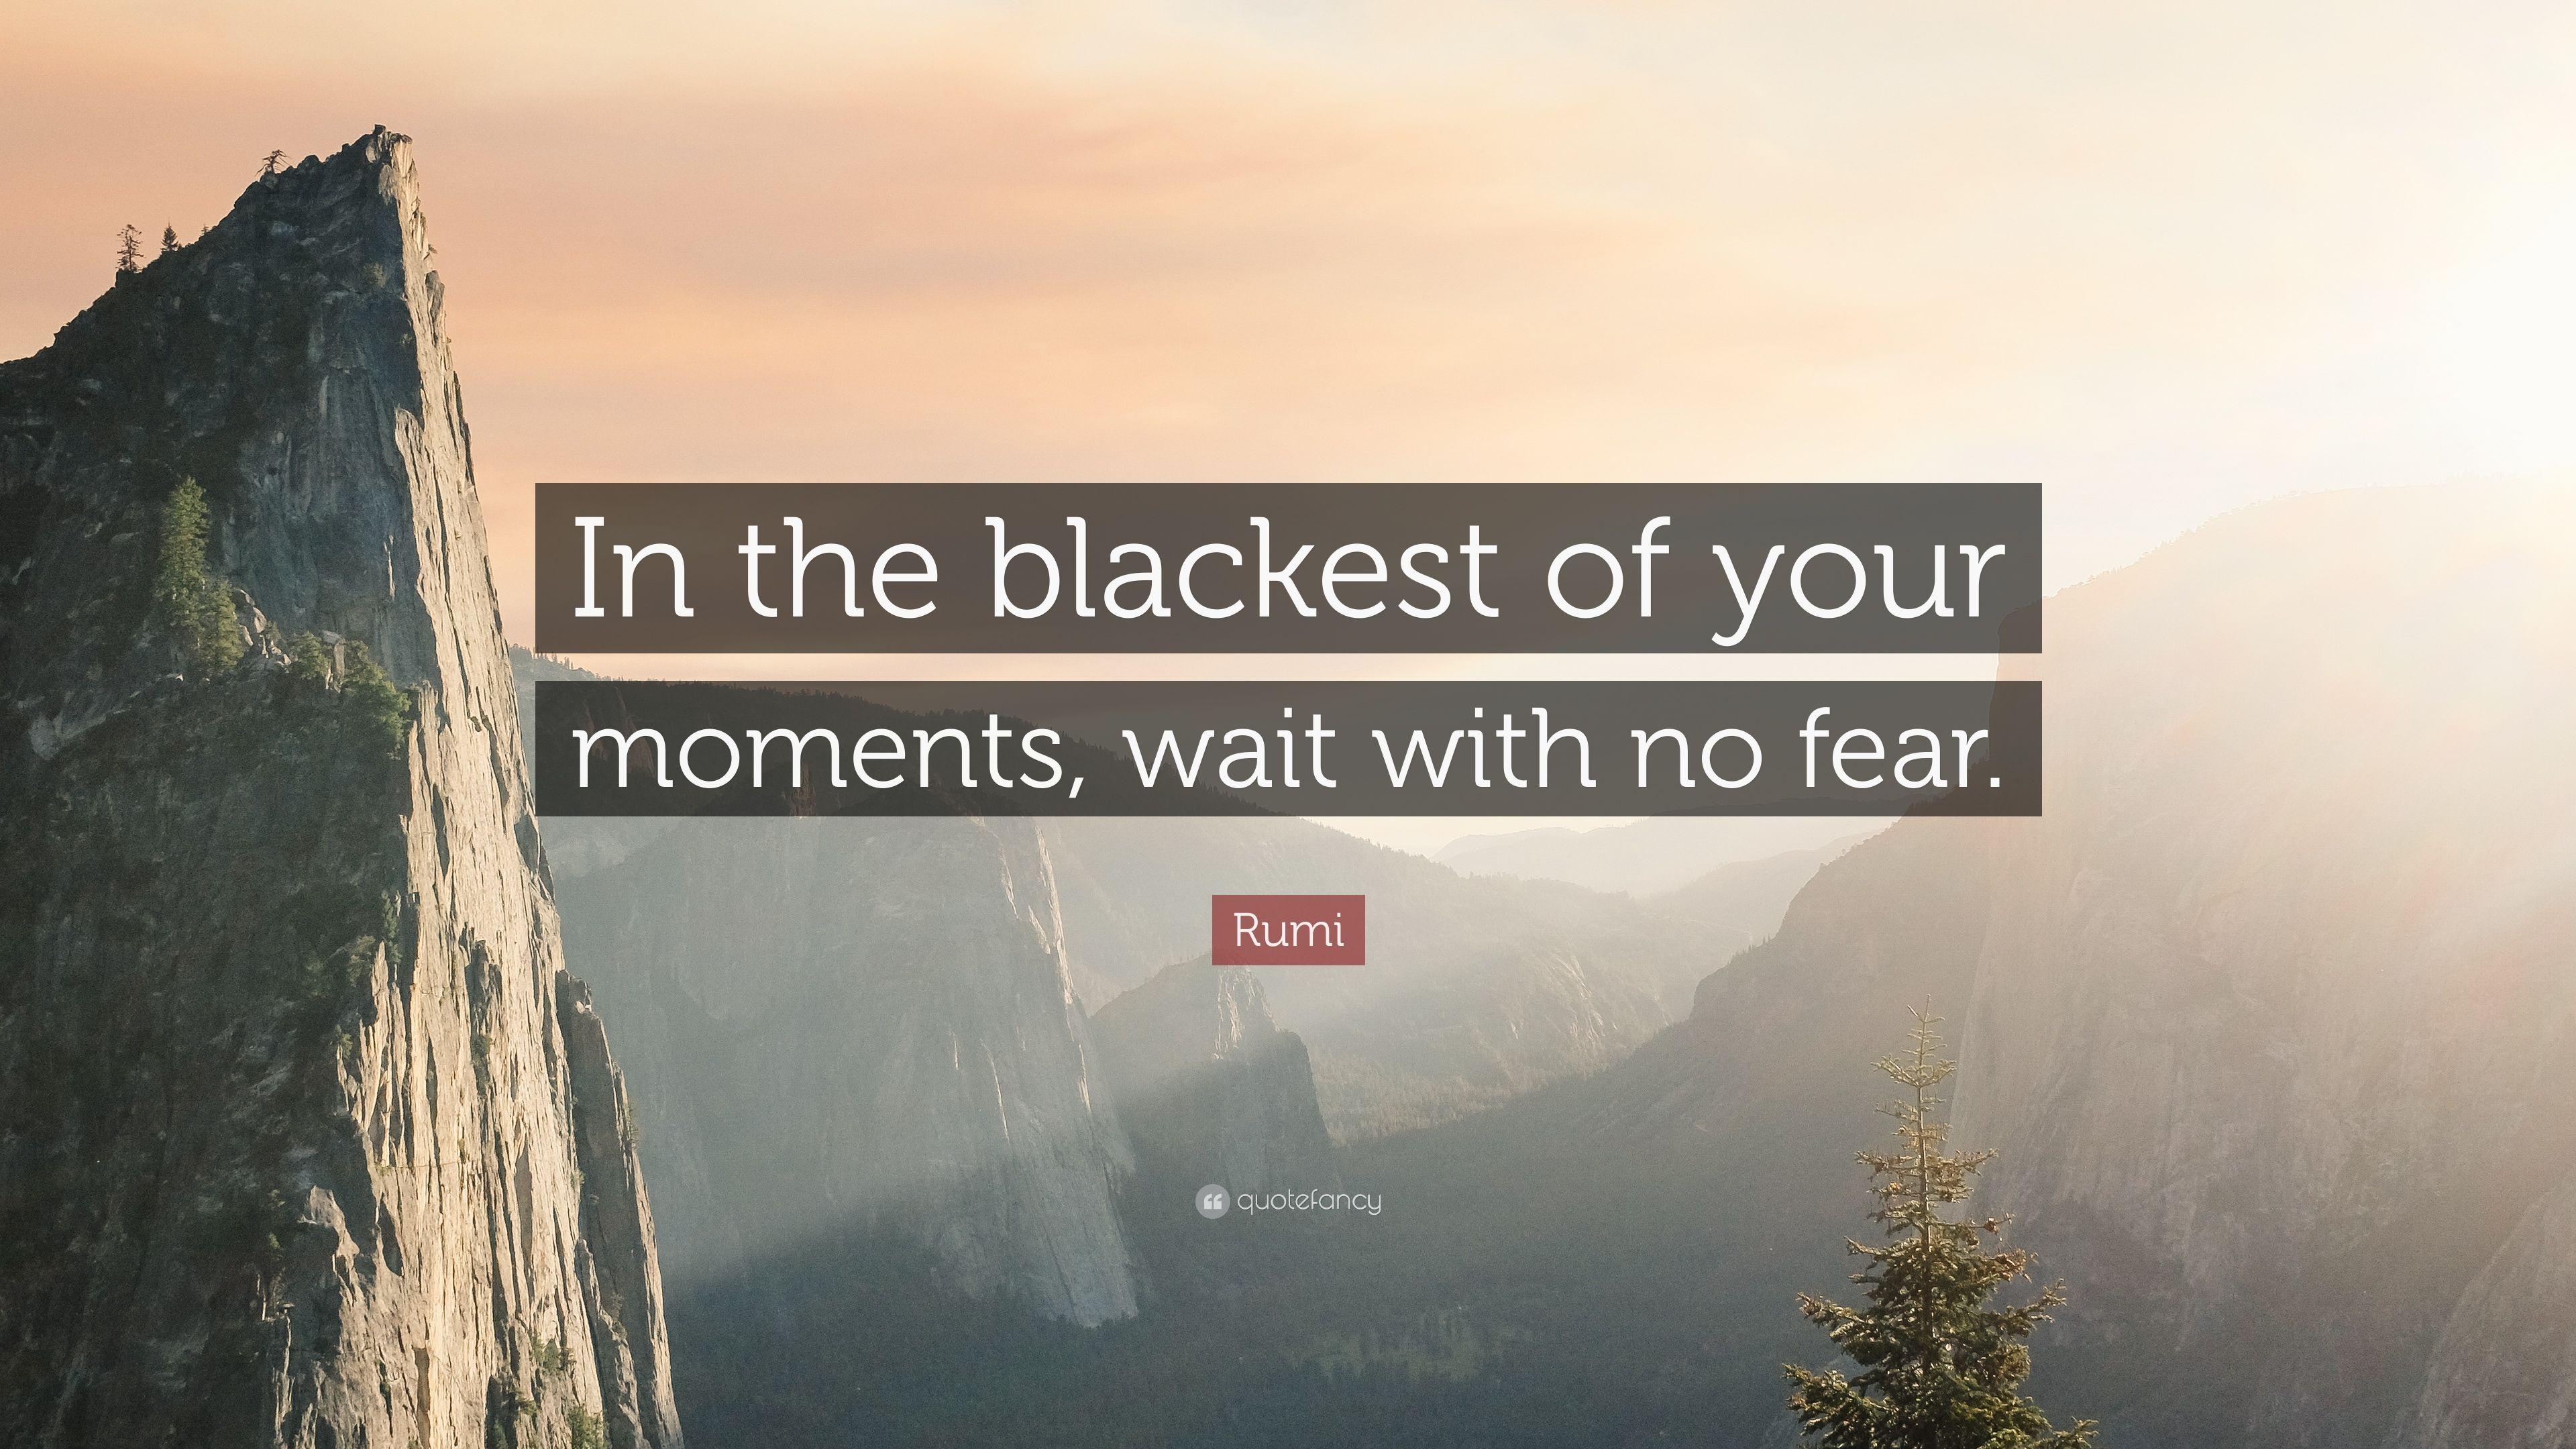 Rumi Quote: “In the blackest of your moments, wait with no fear